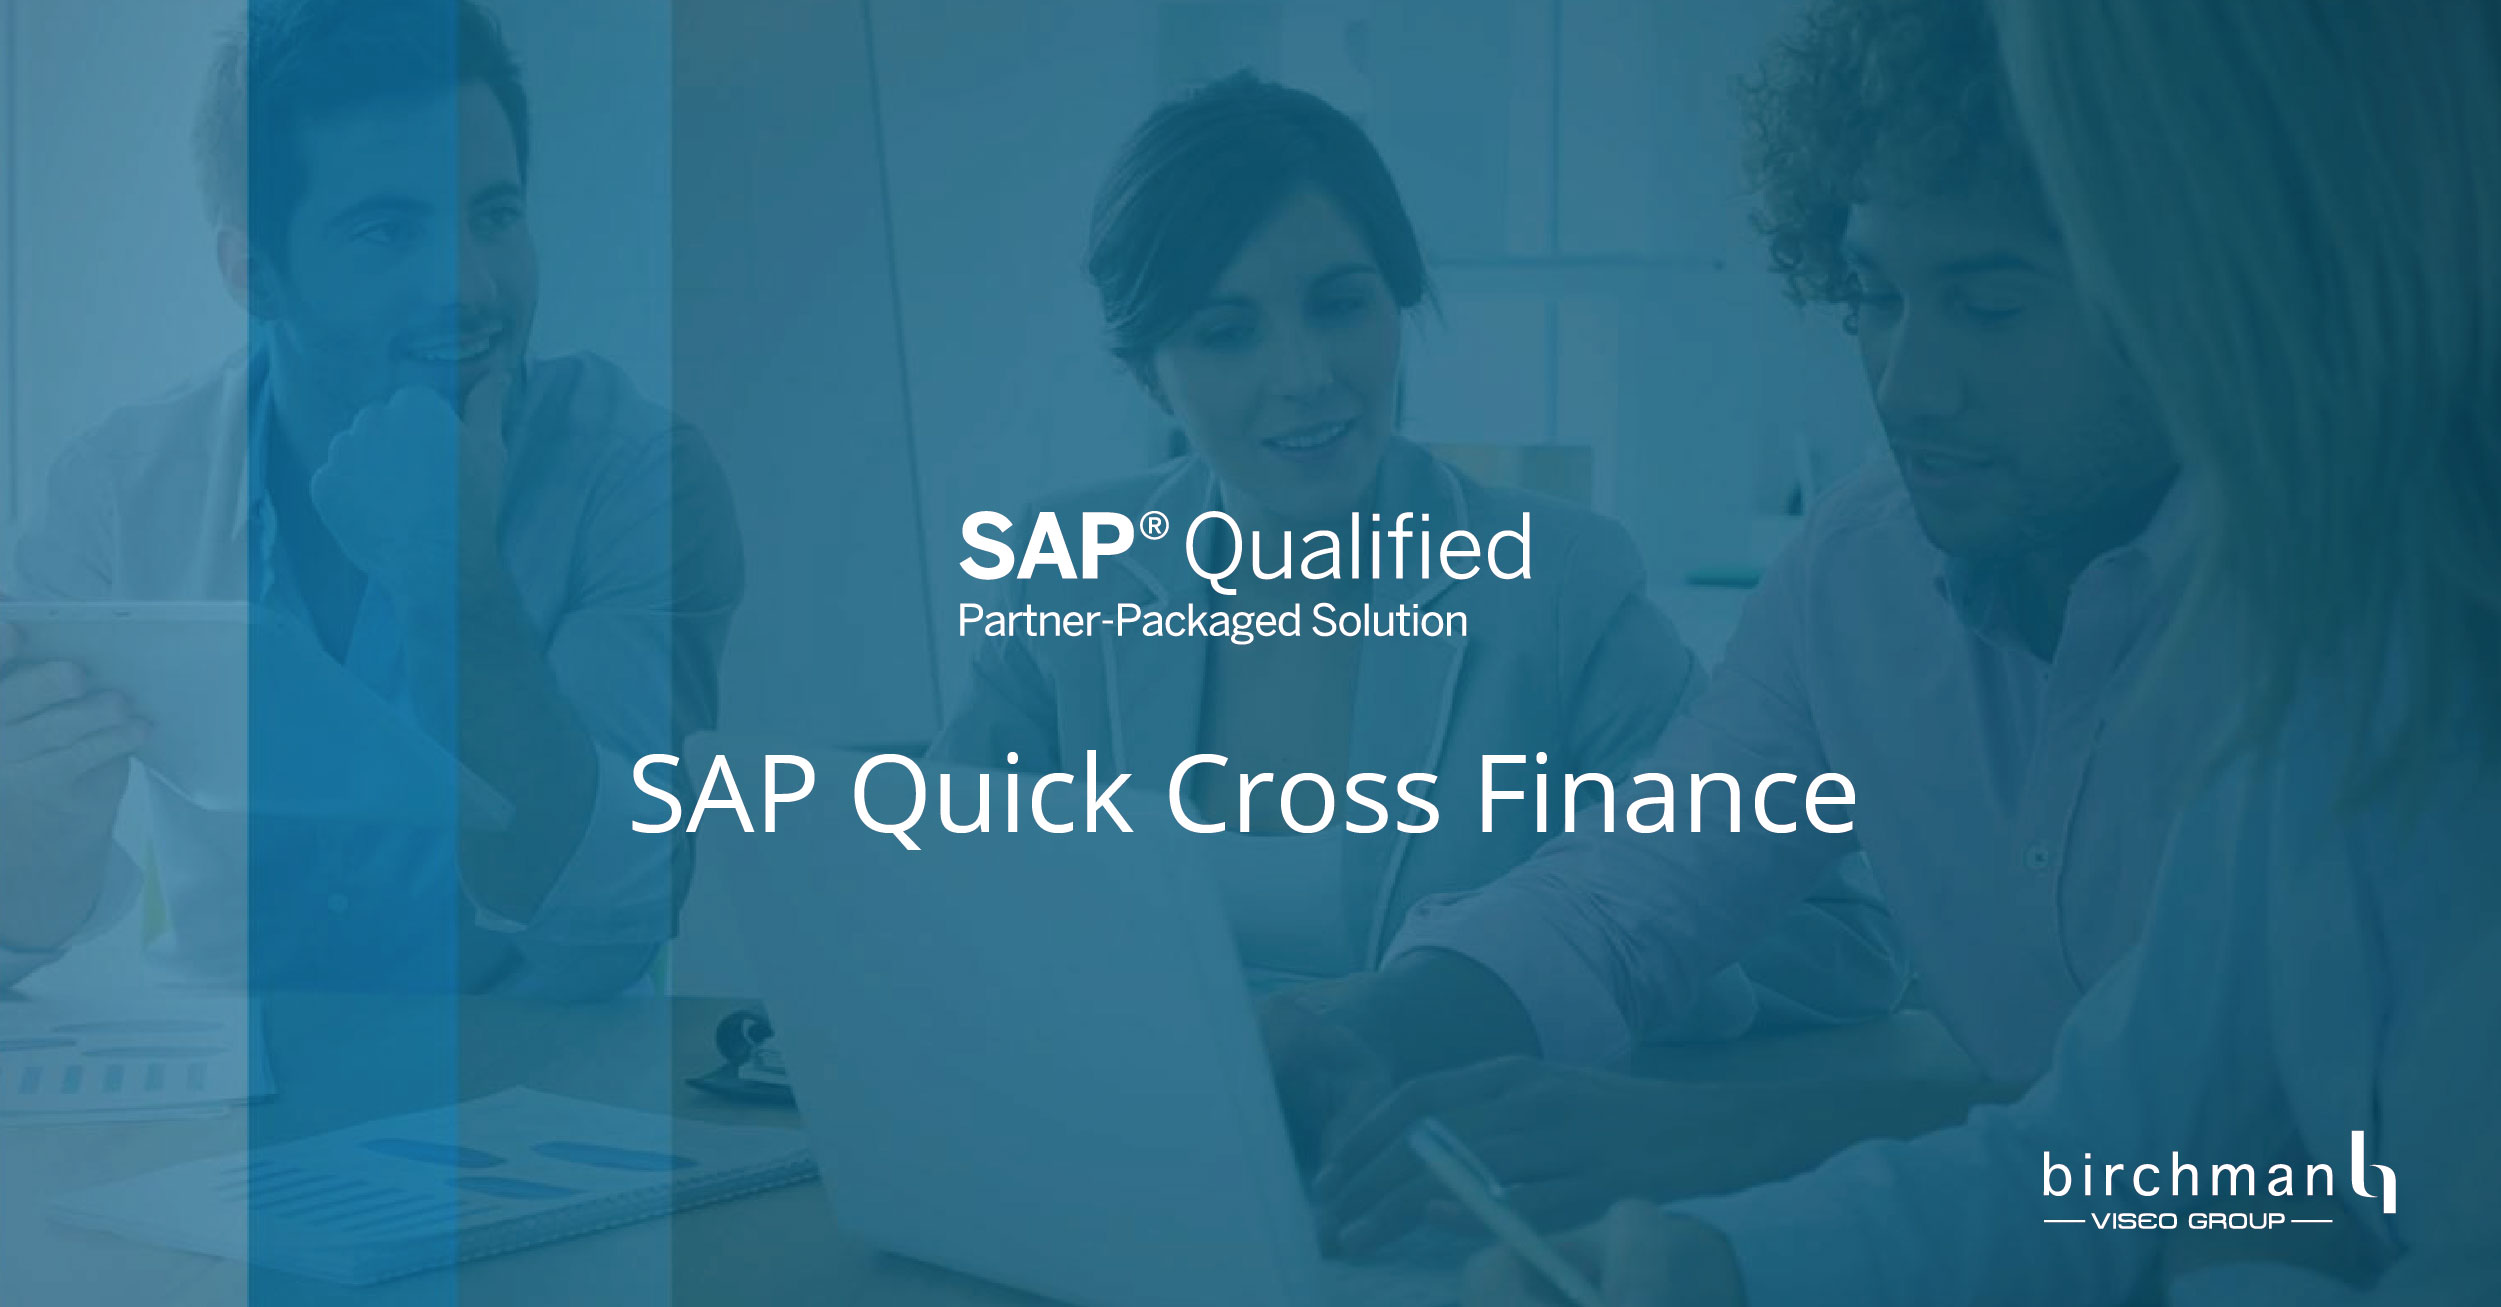 Quick Cross Finance - SAP Qualified Partner-Packaged Solution